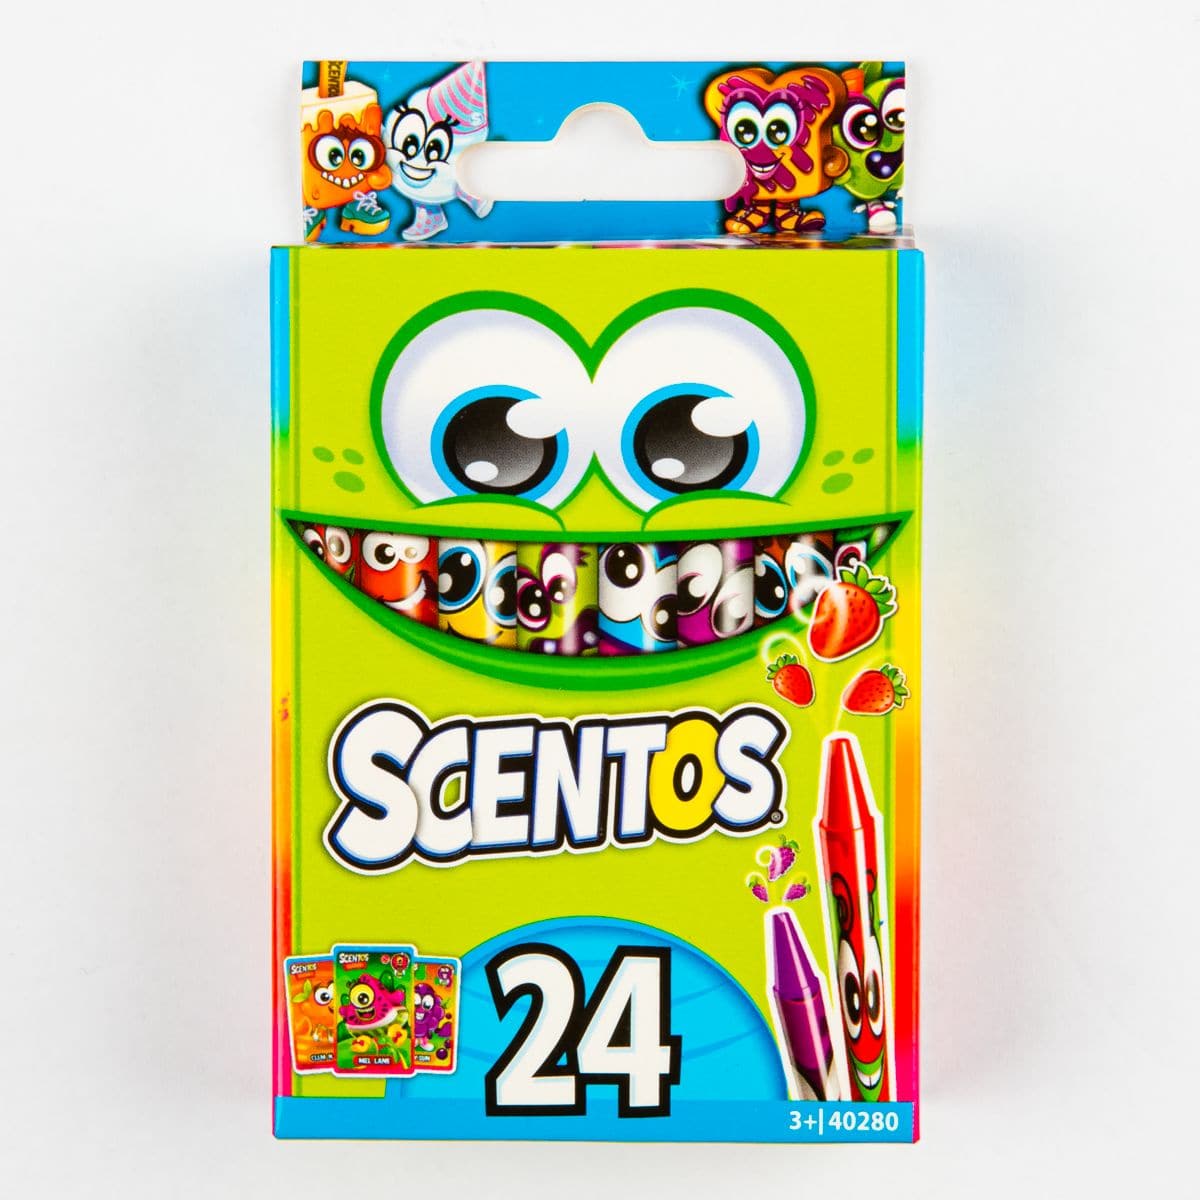 Scentos Scented Crayons 24pk AllBrands Buy Now and save Big